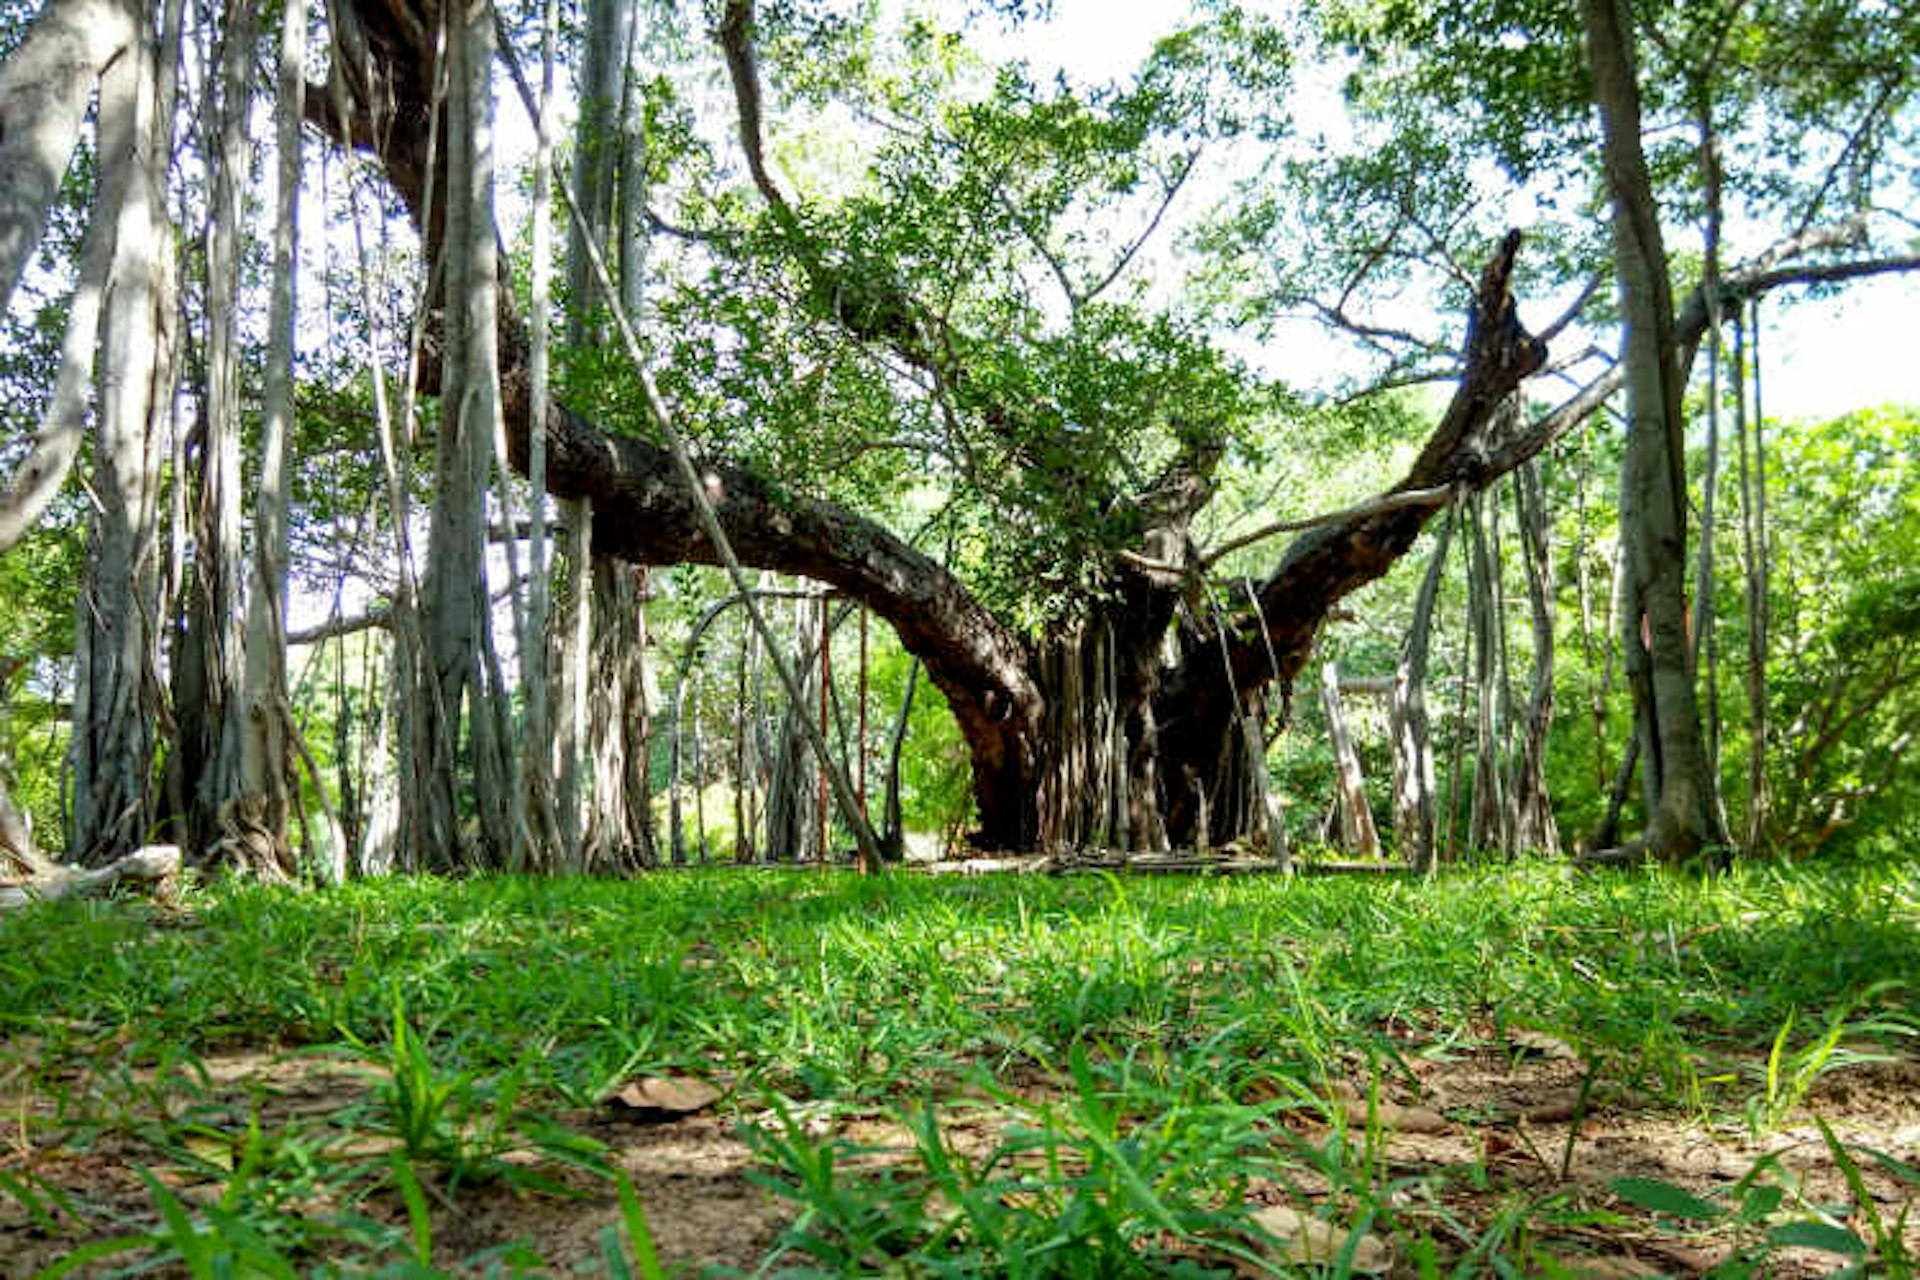 The famous banyan tree at Chennai's Theosophical Society. Image by Ram Karthik / CC BY 2.0.